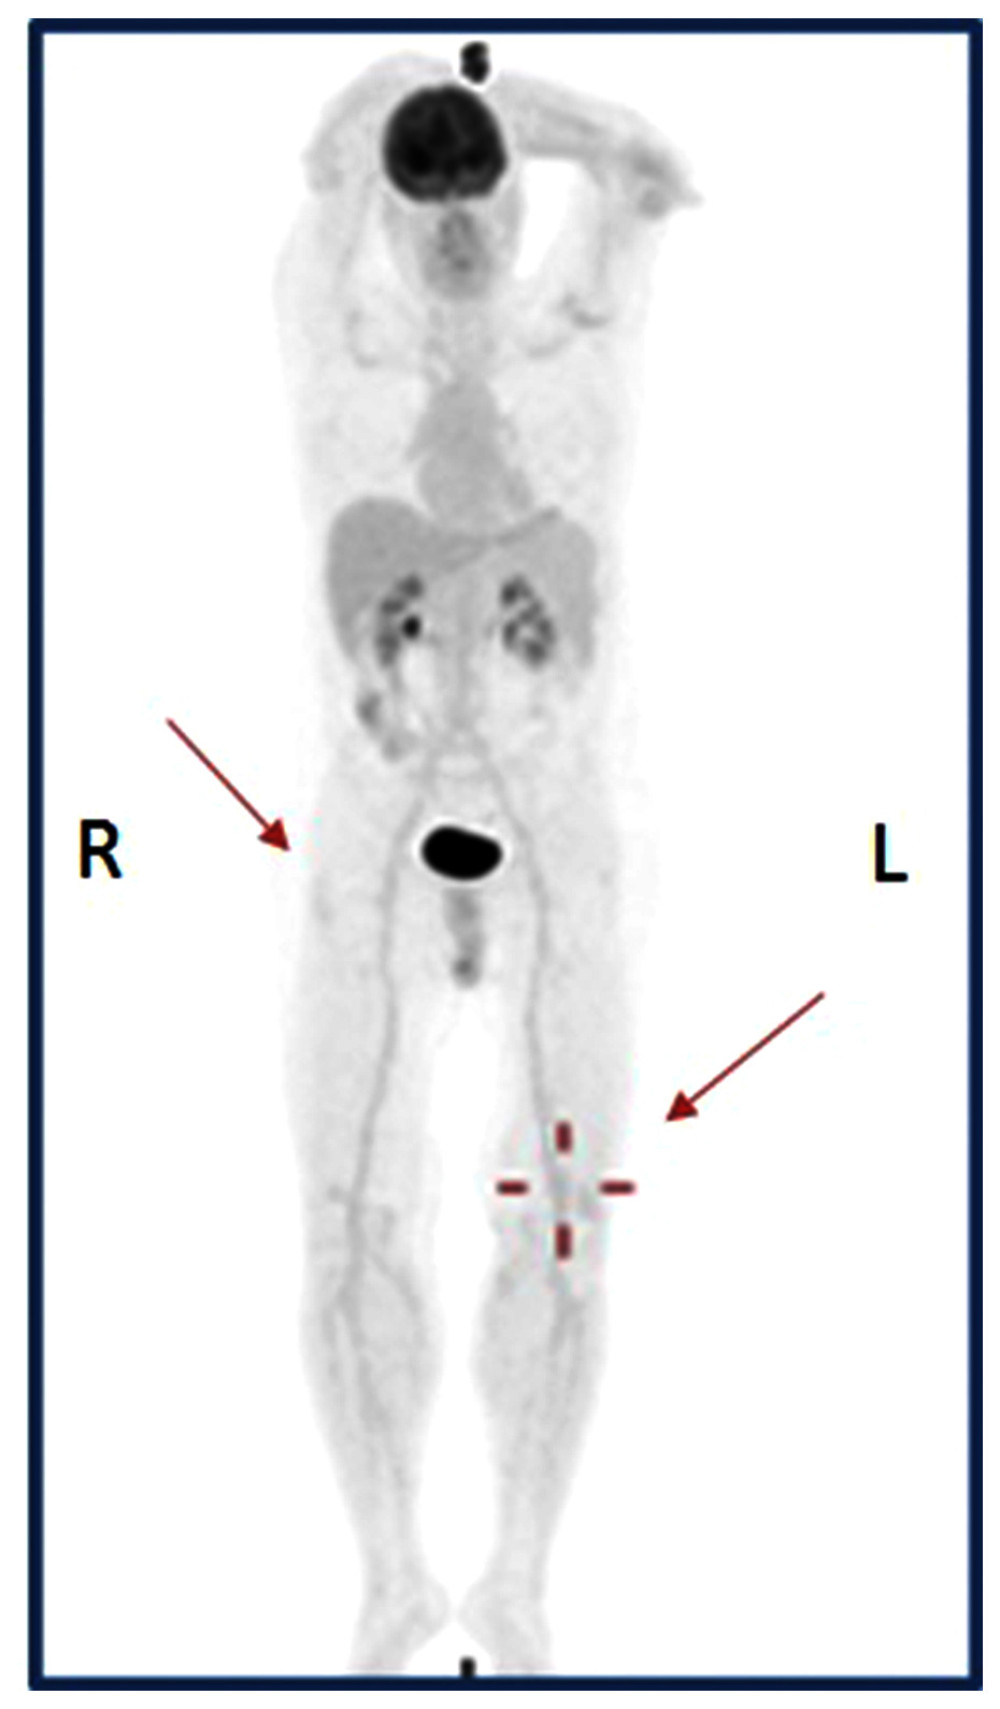 18FDG-PET/CT after immunotherapy: the complete functional response. The scan of 18FDG-PET/CT performed after 3 months of immunotherapy start shows a functional complete response of all previous metastatic lesions; in particular, the previous thighbones metastases are now undetectable (red arrows). R – right, L – left.